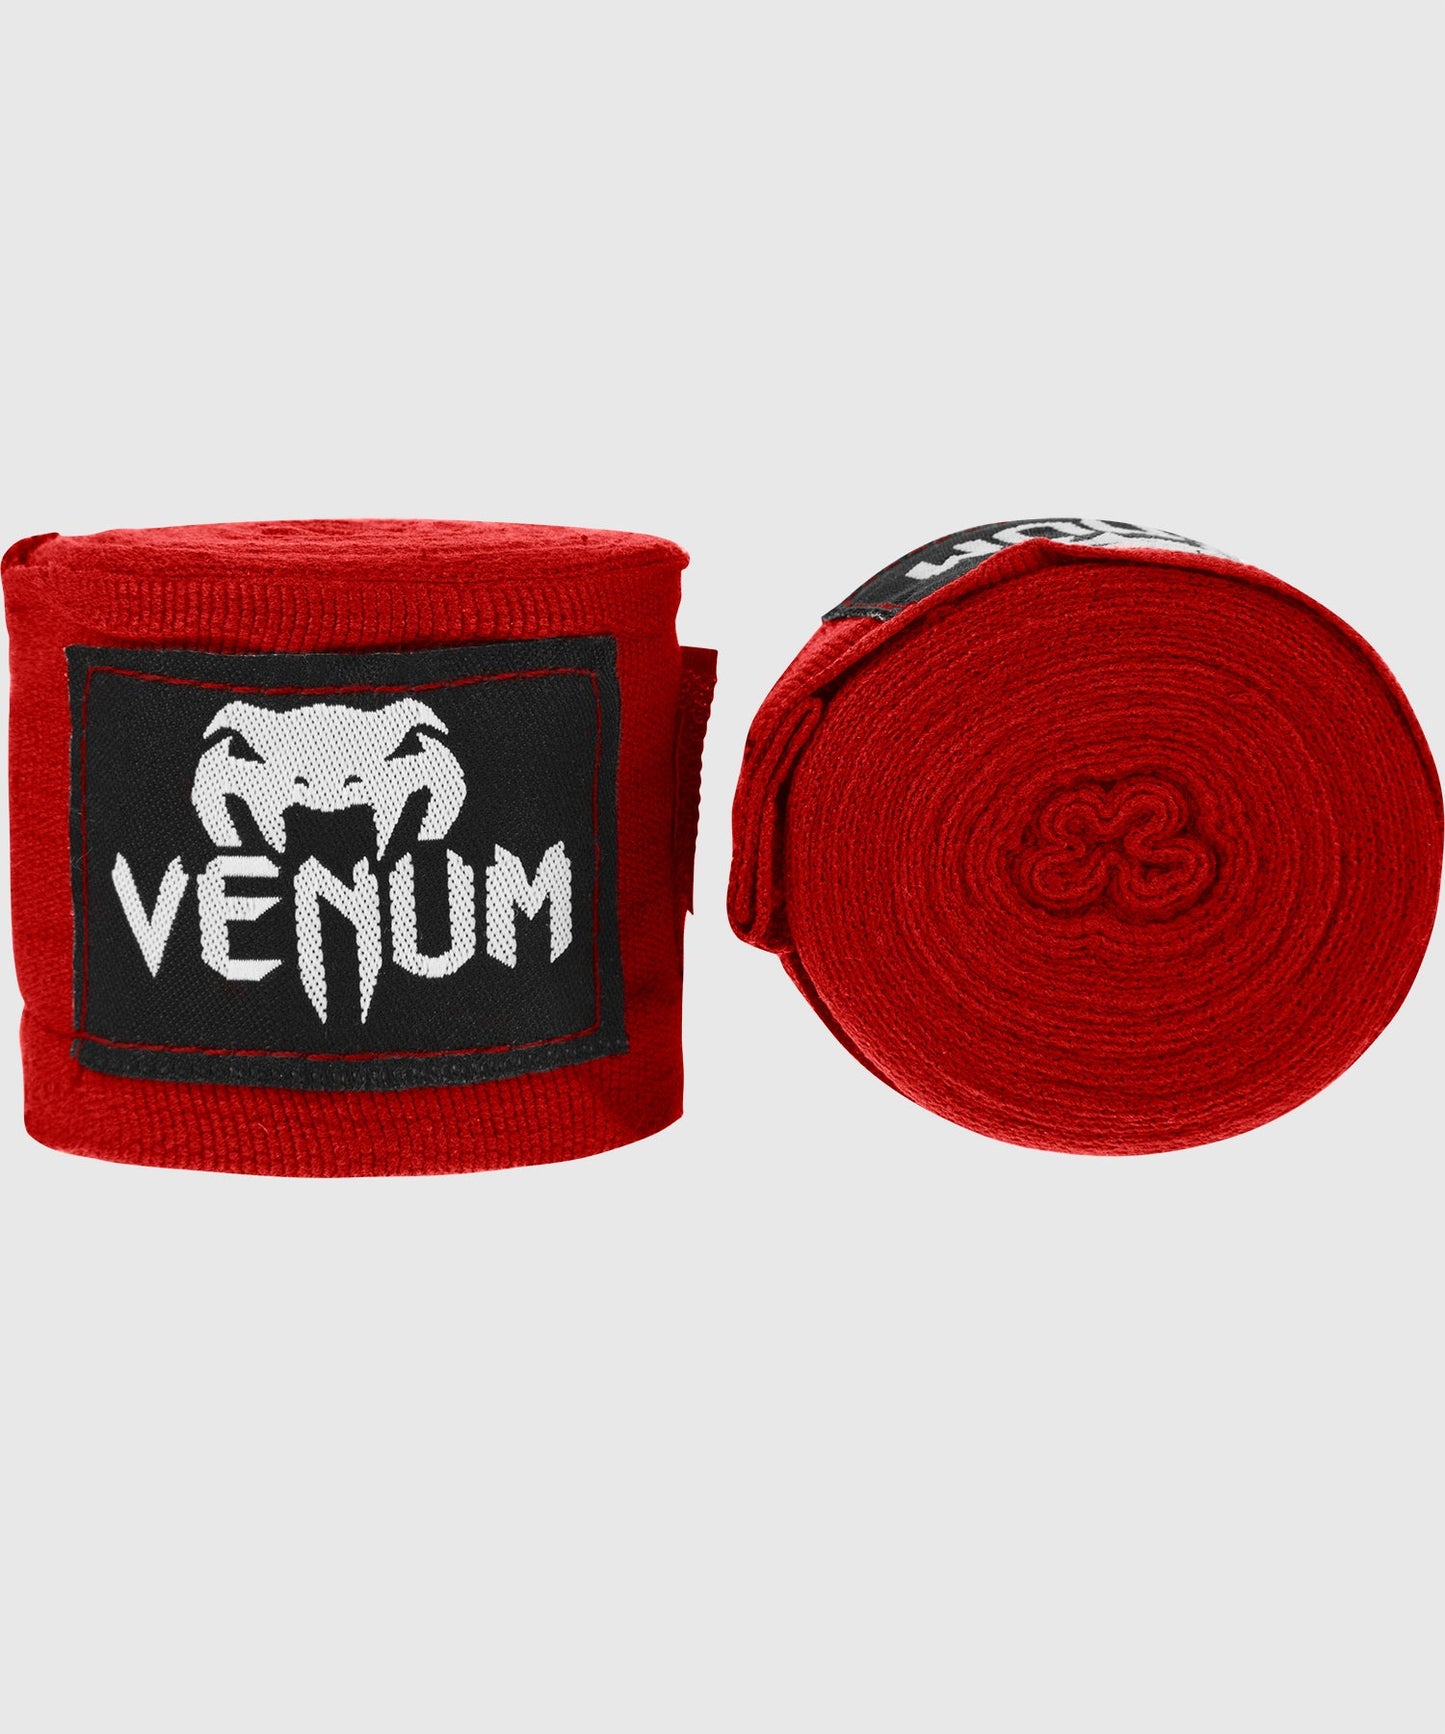 Venum Kontact Boxing Hand Wraps - Red - 98 in